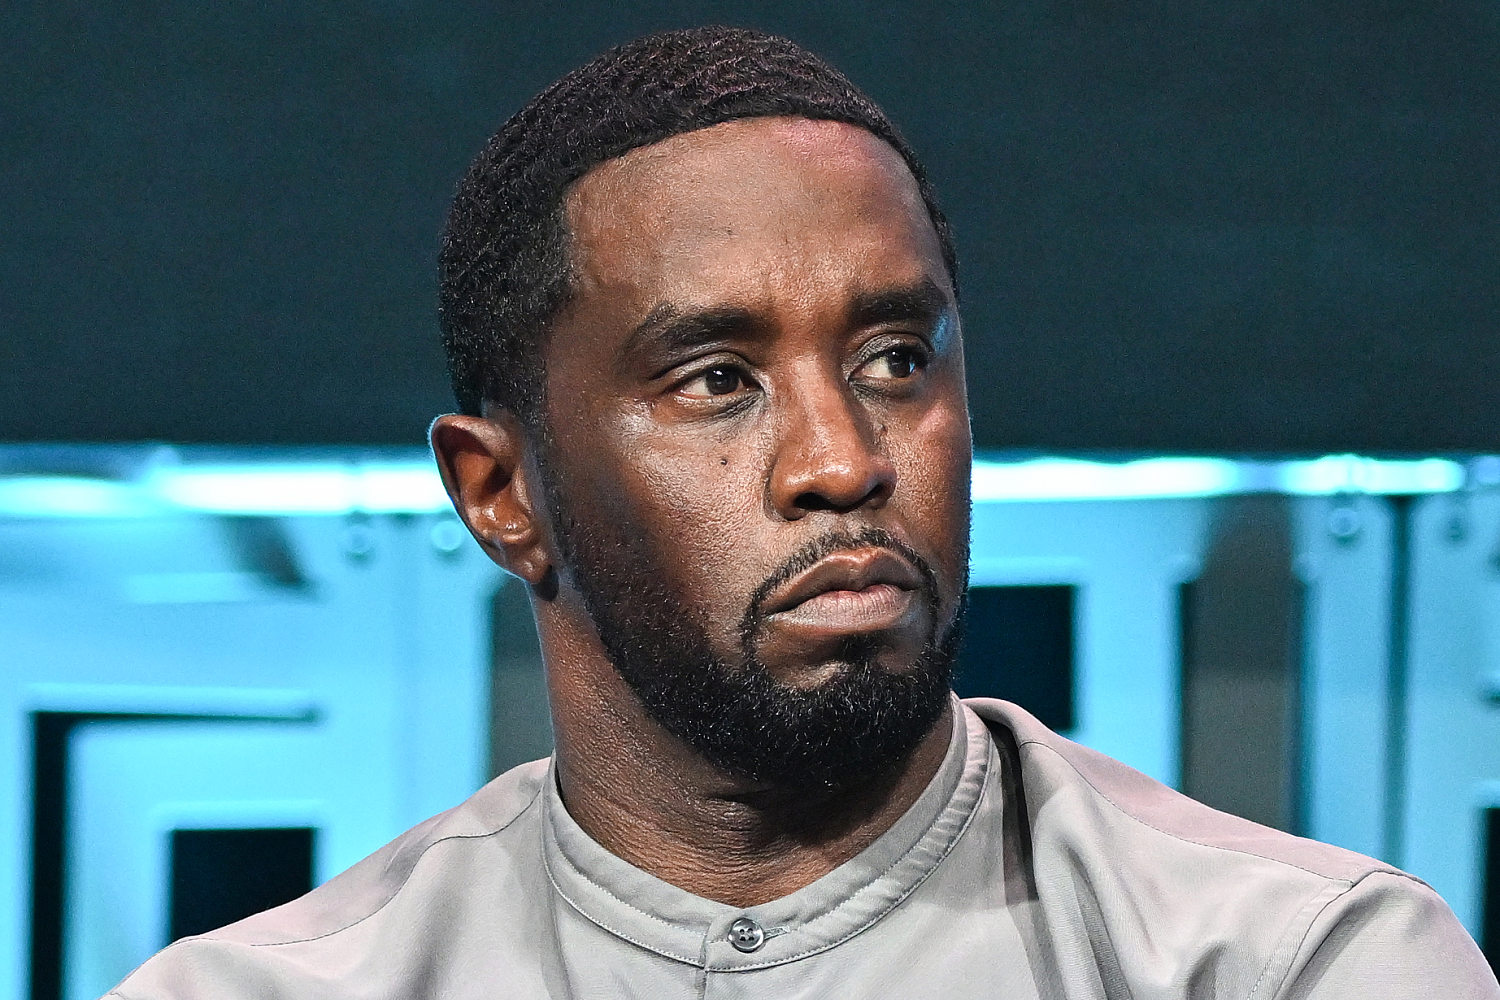 Sean 'Diddy' Combs 'truly sorry' after video appears to show him beating ex-girlfriend